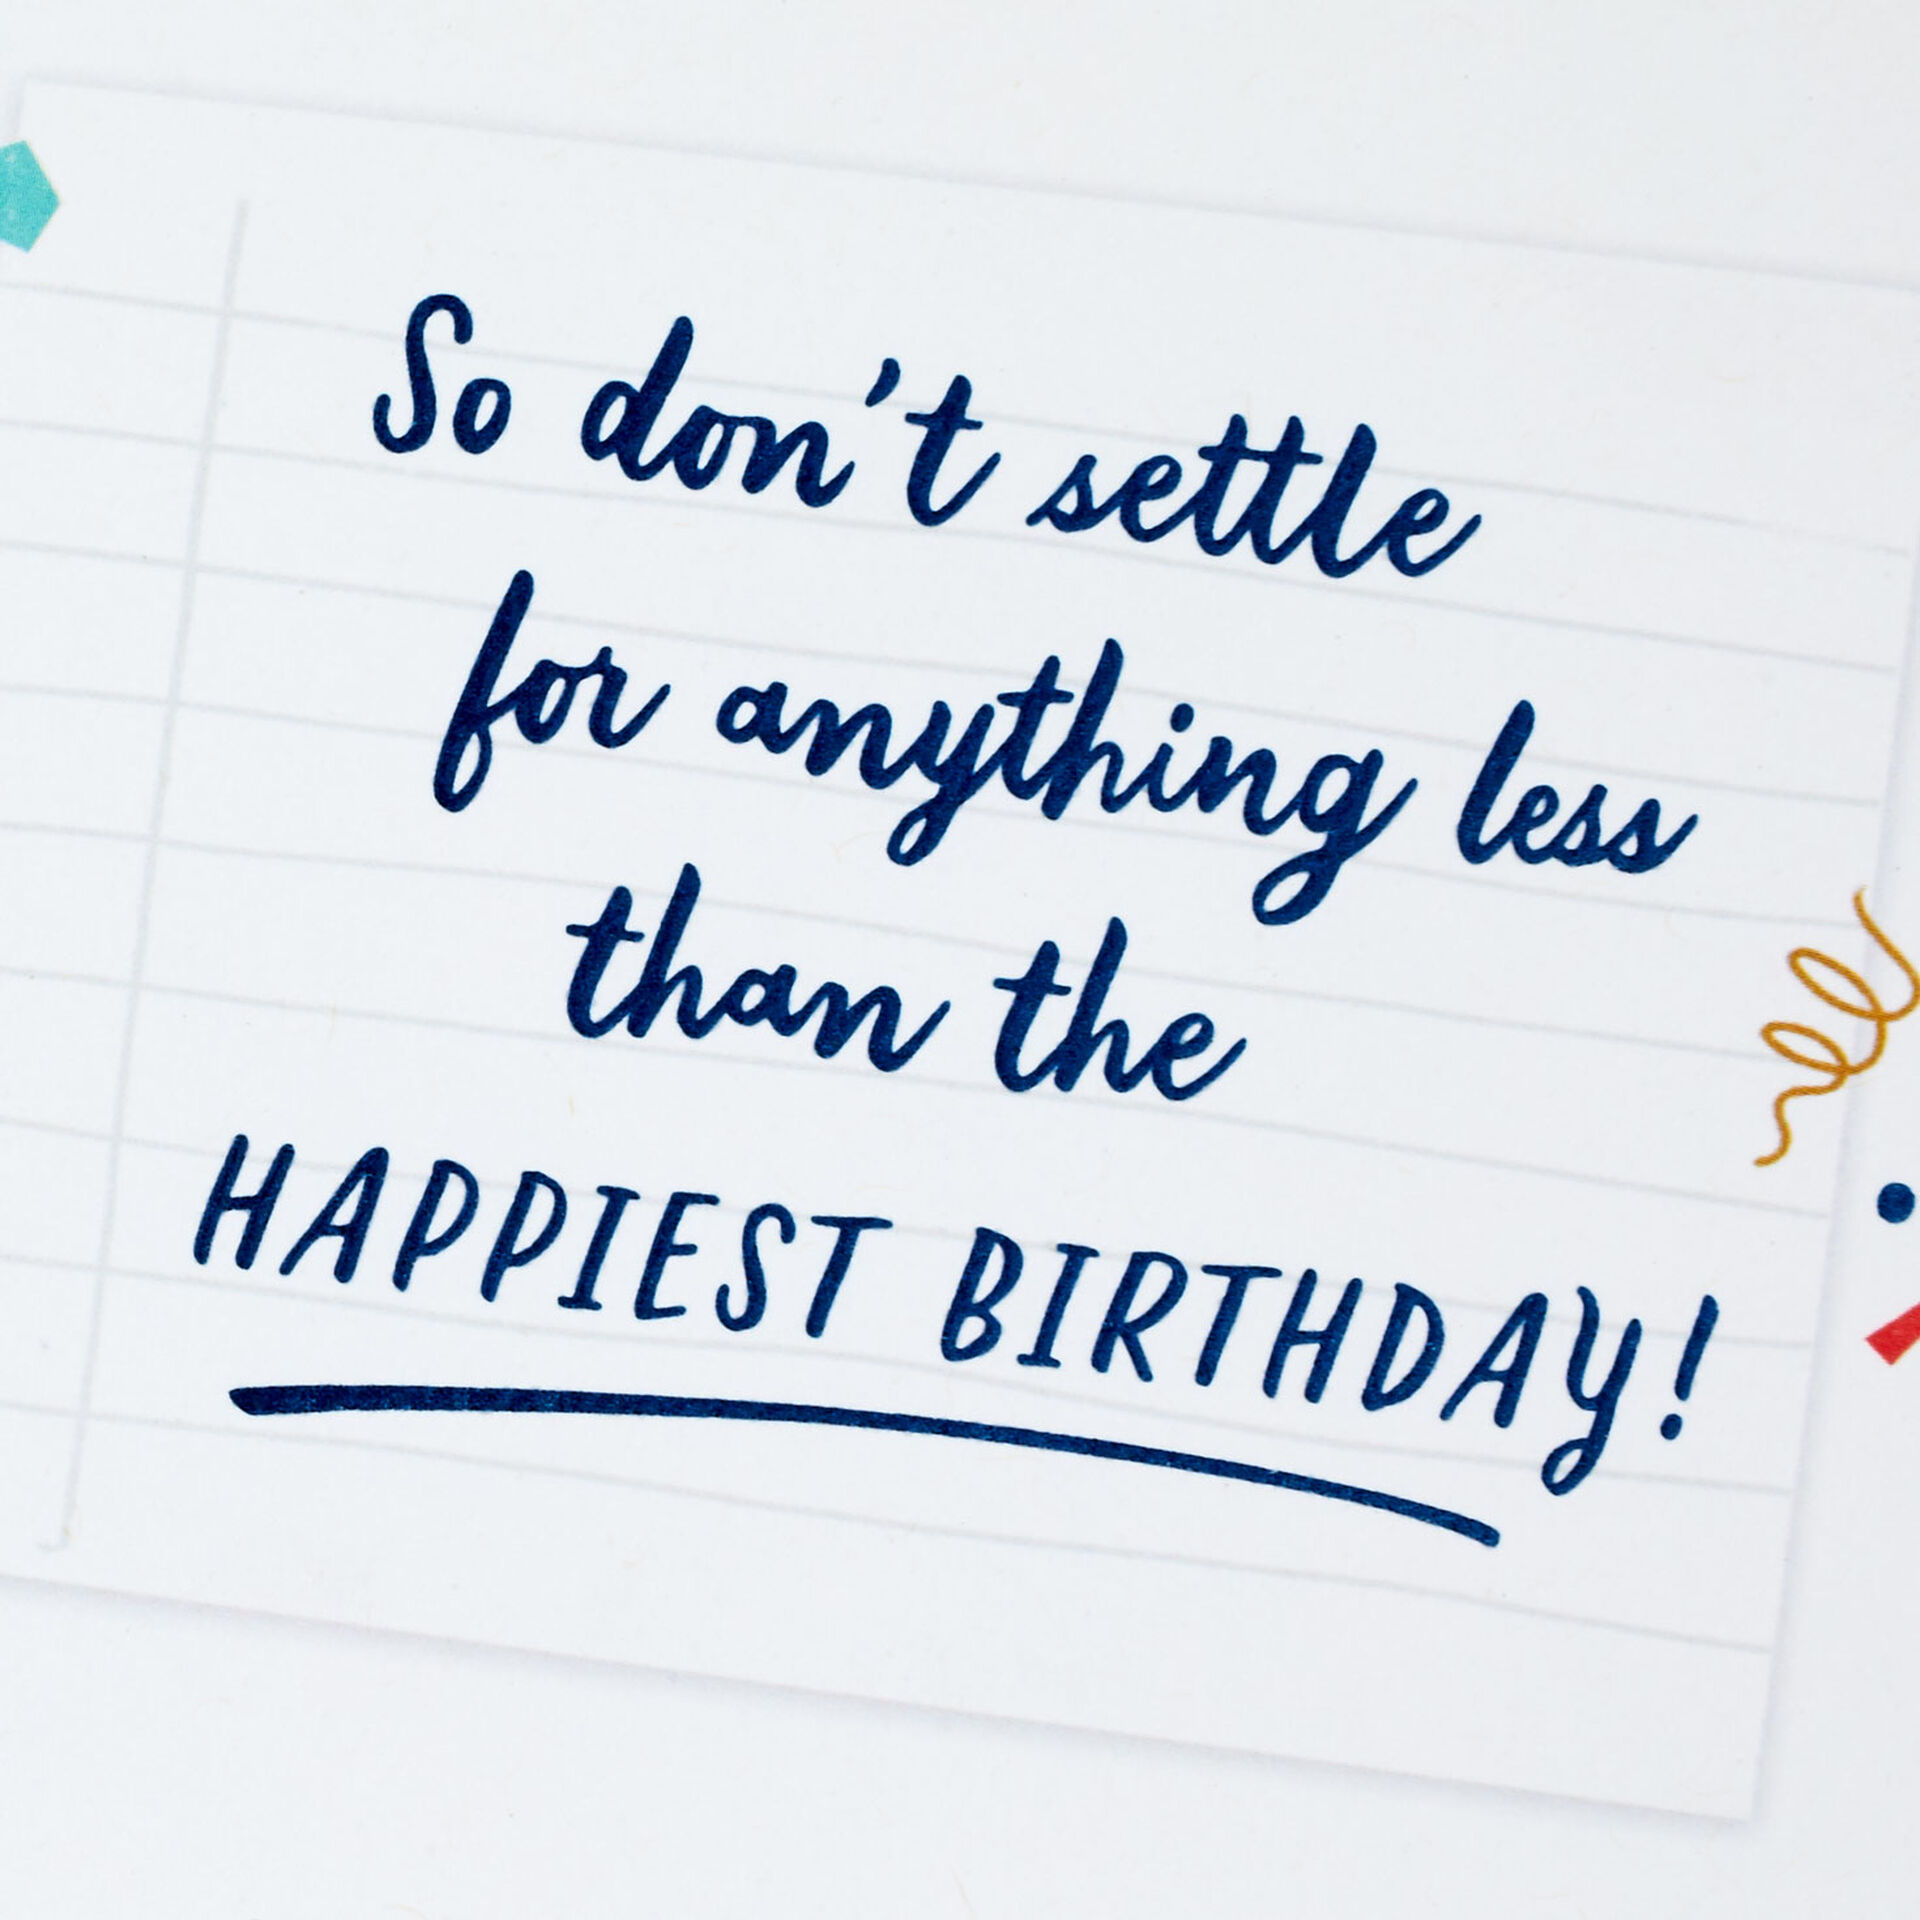 Desktop-Icons-Birthday-Card-for-Coworker_299HBD4599_02